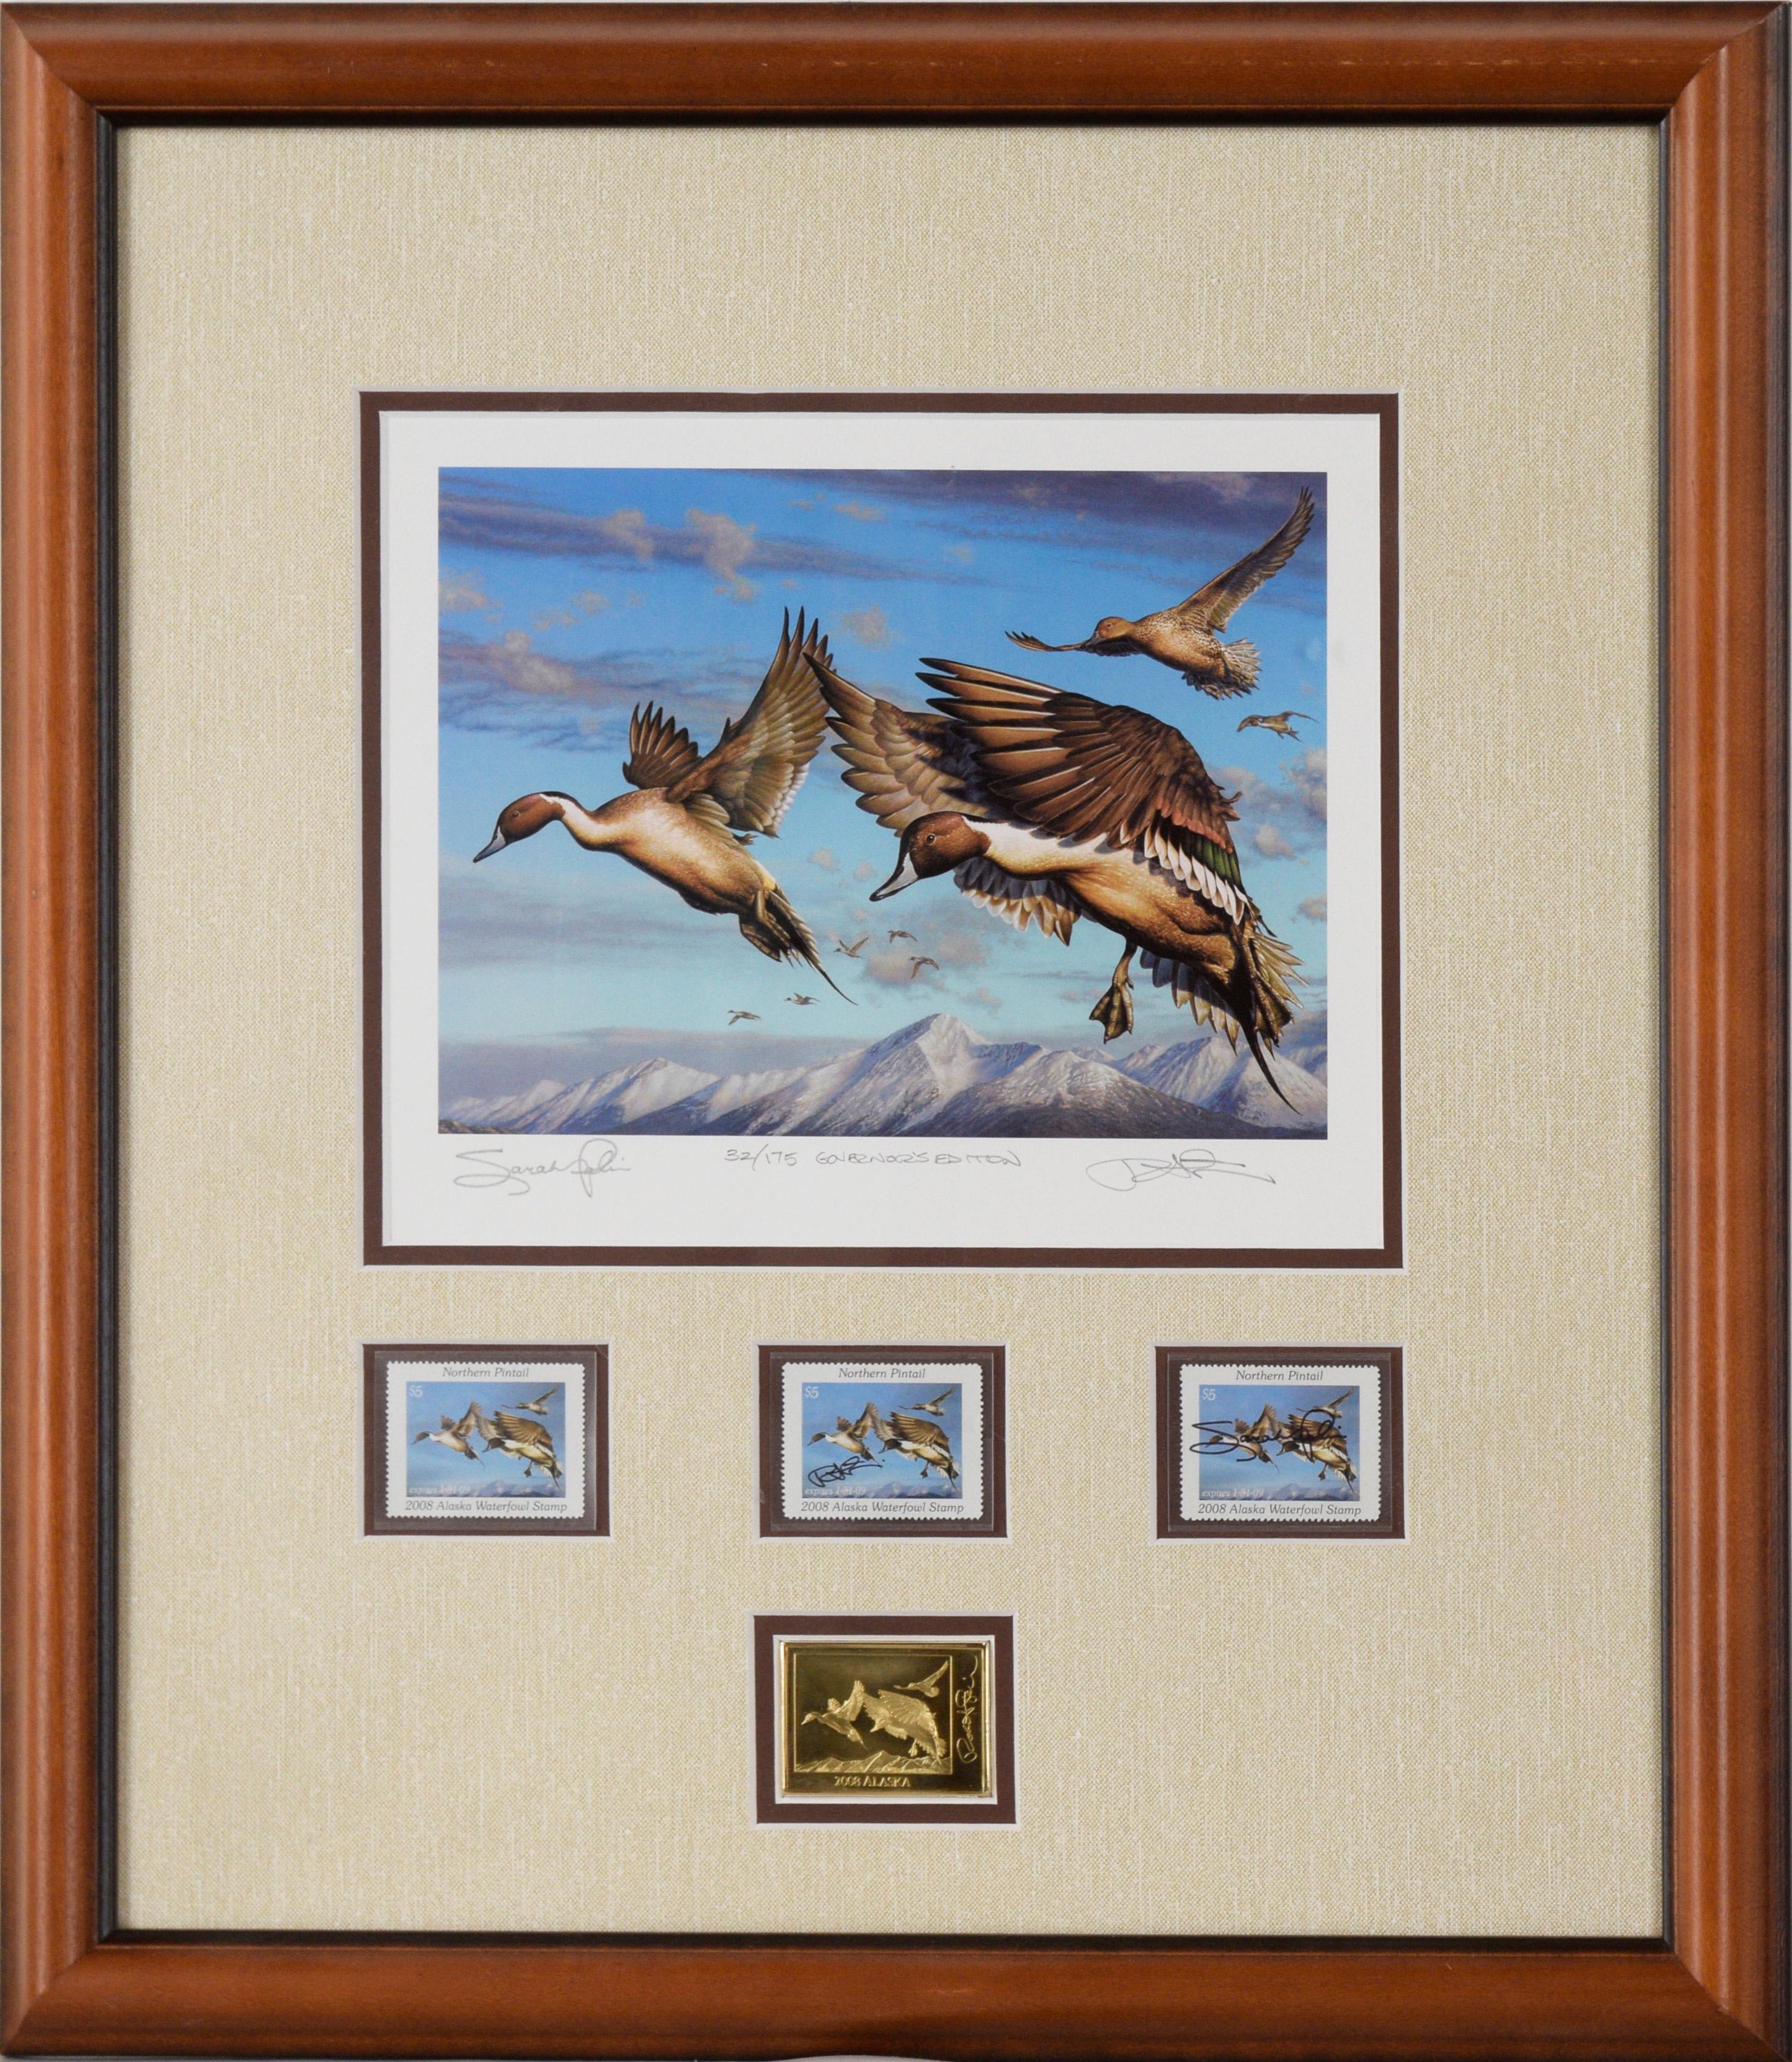 2008 Alaska Duck Stamp Print
2008 Alaska Duck Stamp Print by Robert Steiner (American, b. 1949). Four Alaska Duck Stamp Prints are the focal point with 